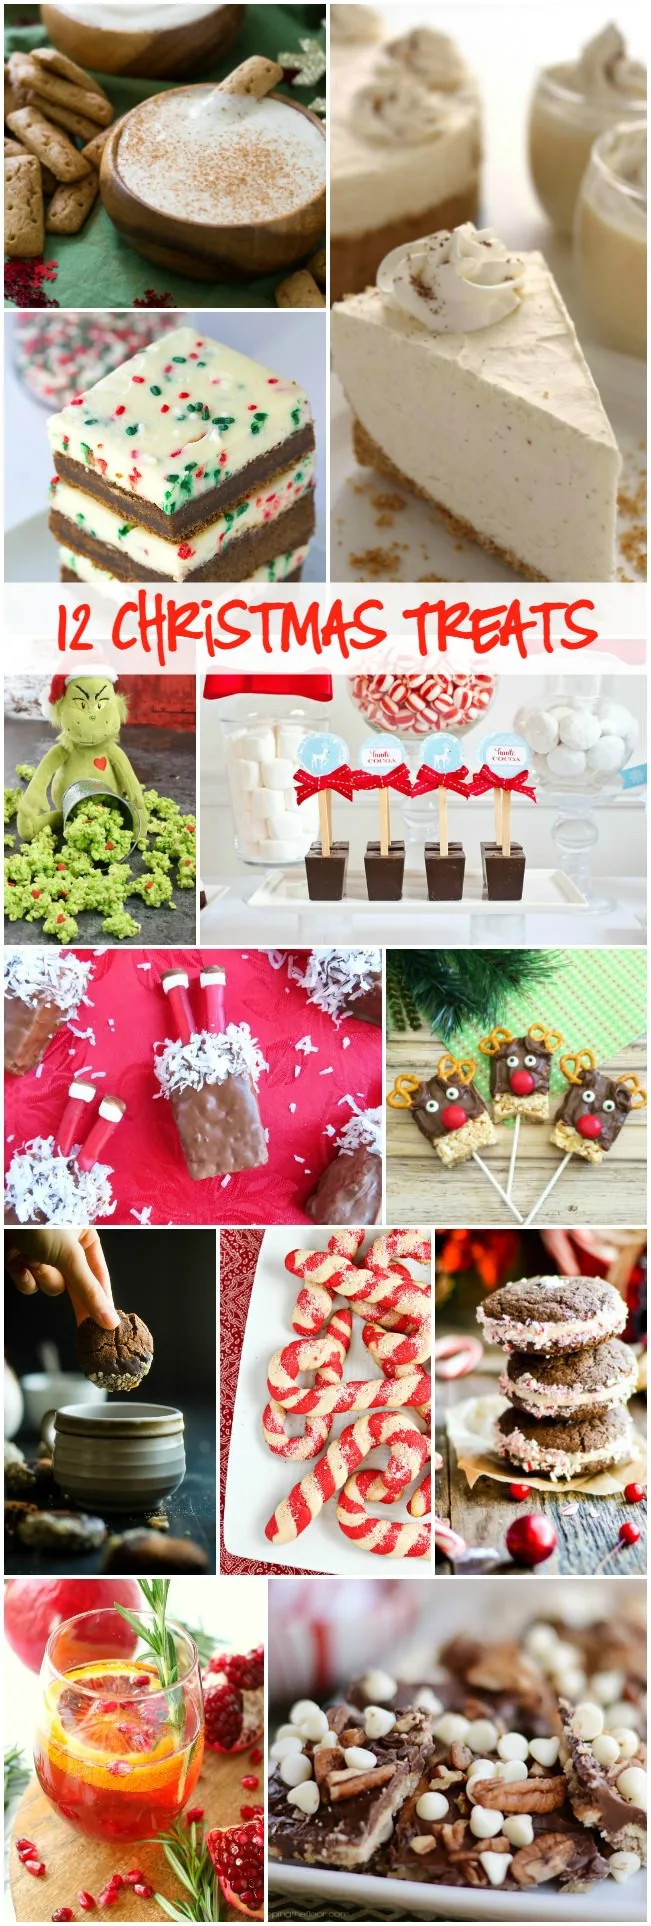 12 Christmas Treats that are perfect for the kids and adults to enjoy!